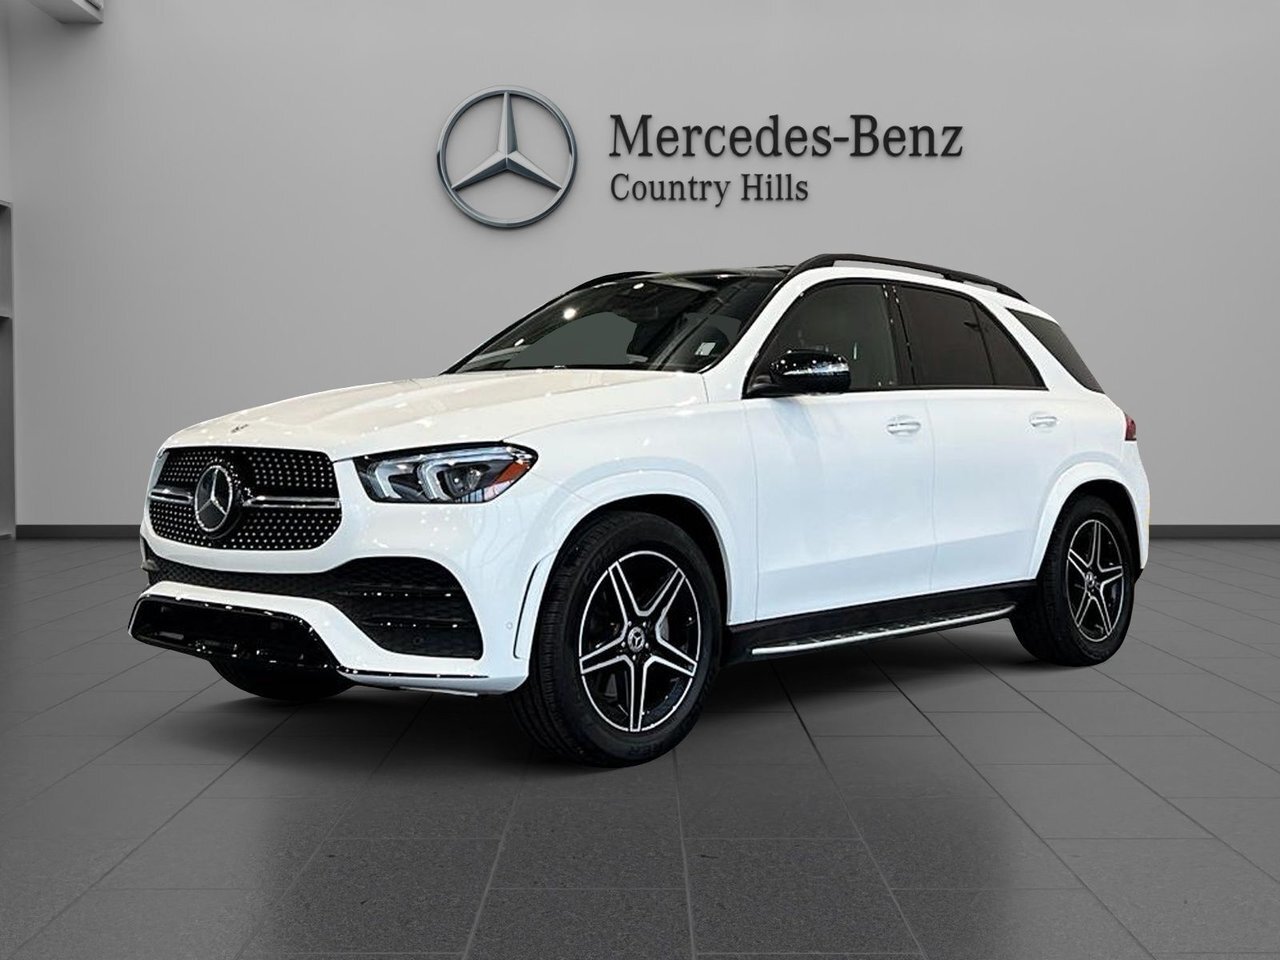 2022 Mercedes-Benz GLE350 4MATIC SUV One owner! Warranty until 2027!